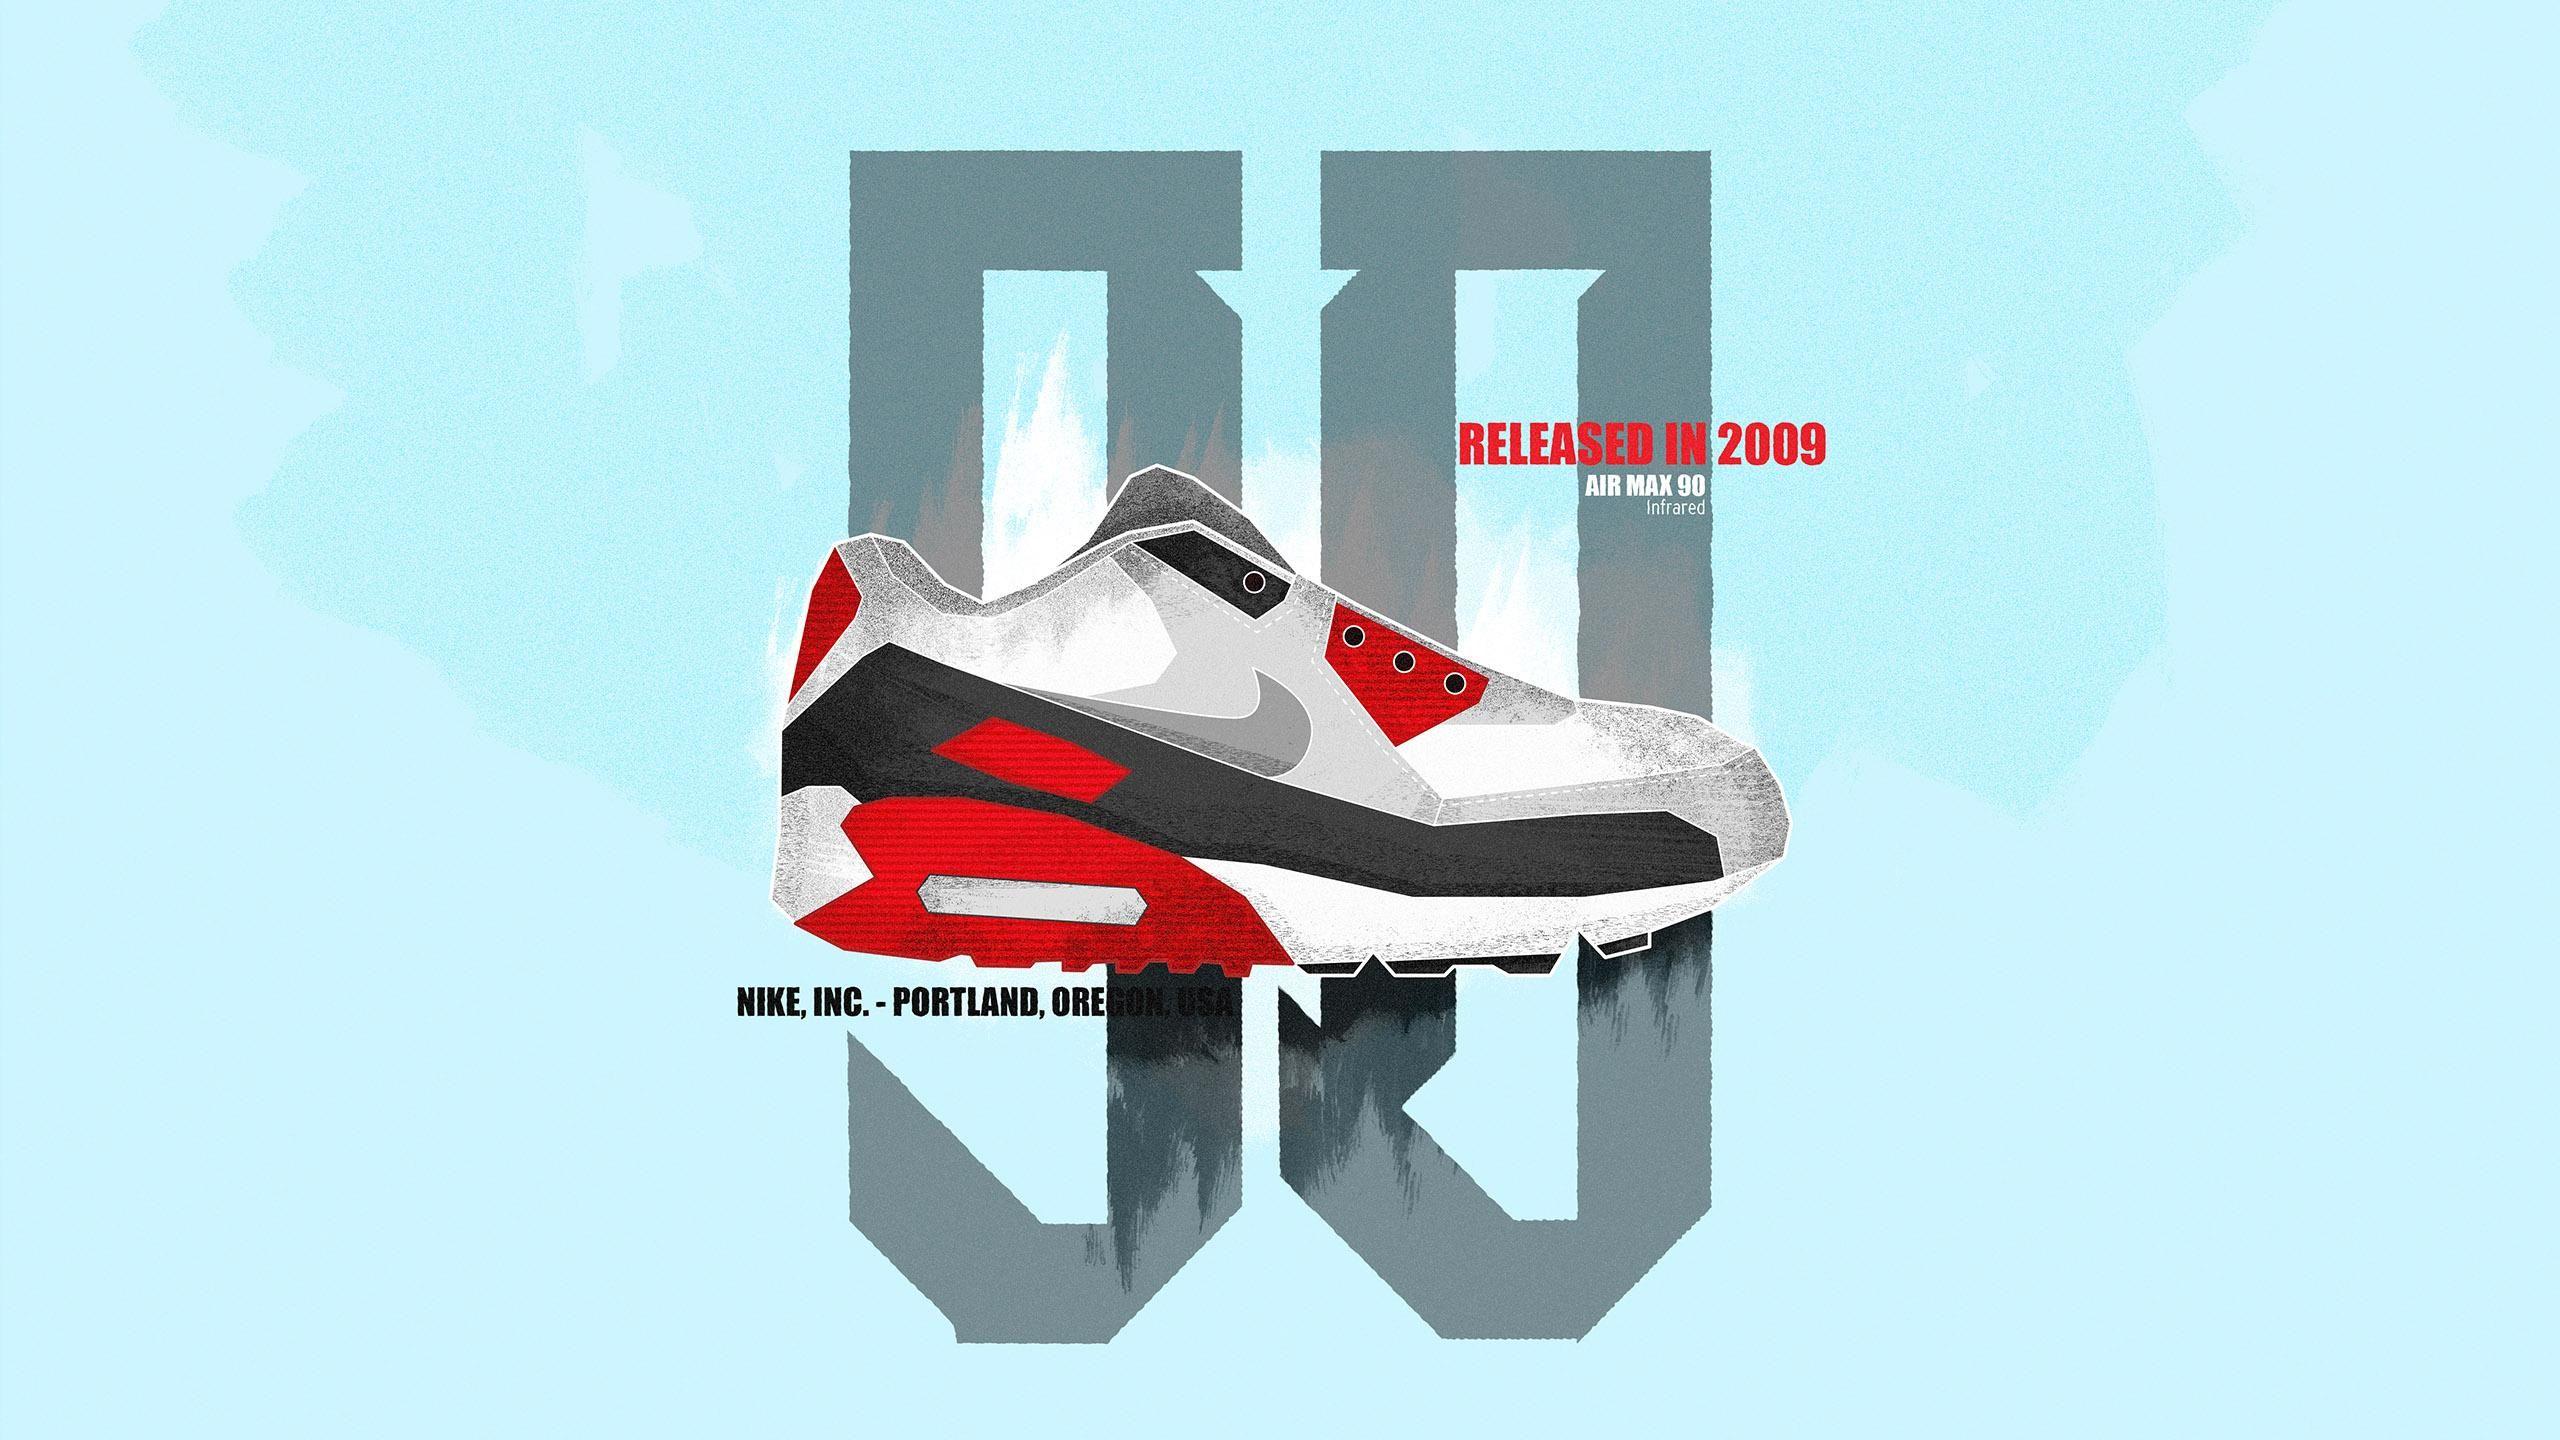 Air Max Wallpaper (Picture)